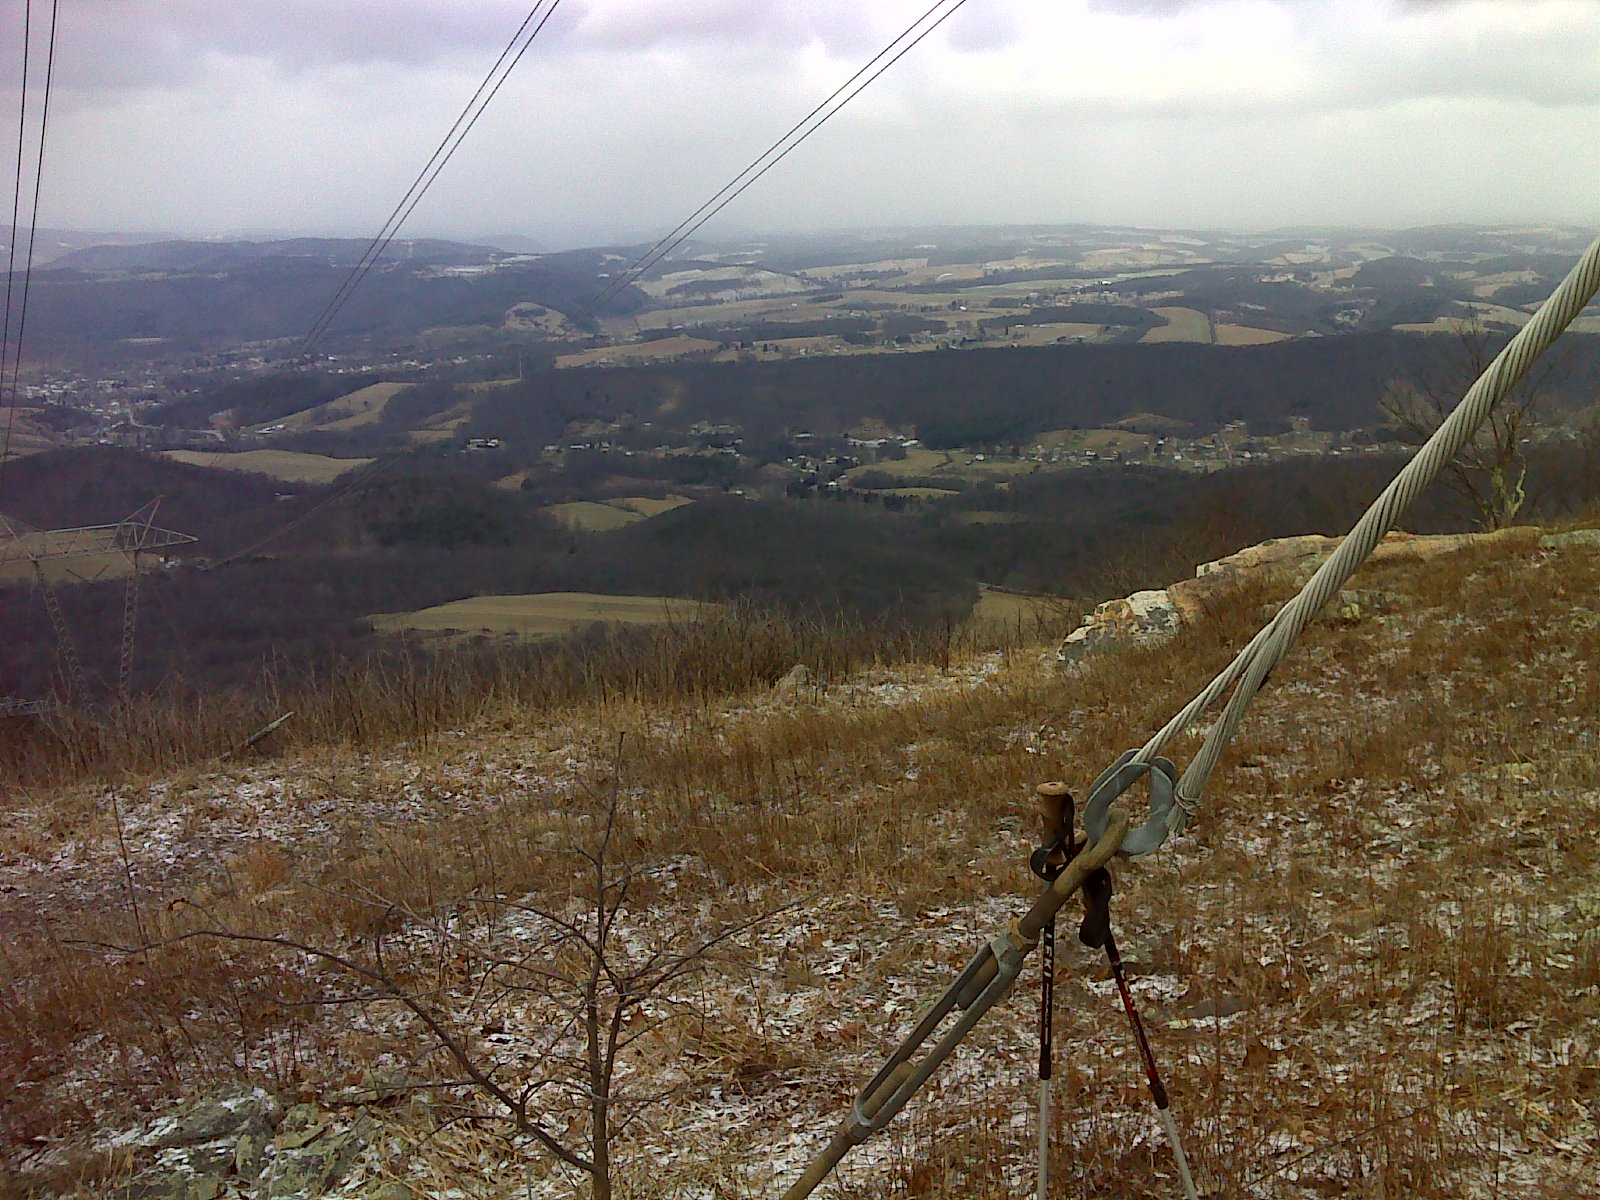 mm 11.9 View into West Virginia from power line clearing on
Peters Mountain  Courtesy pjwetzel@gmail.com